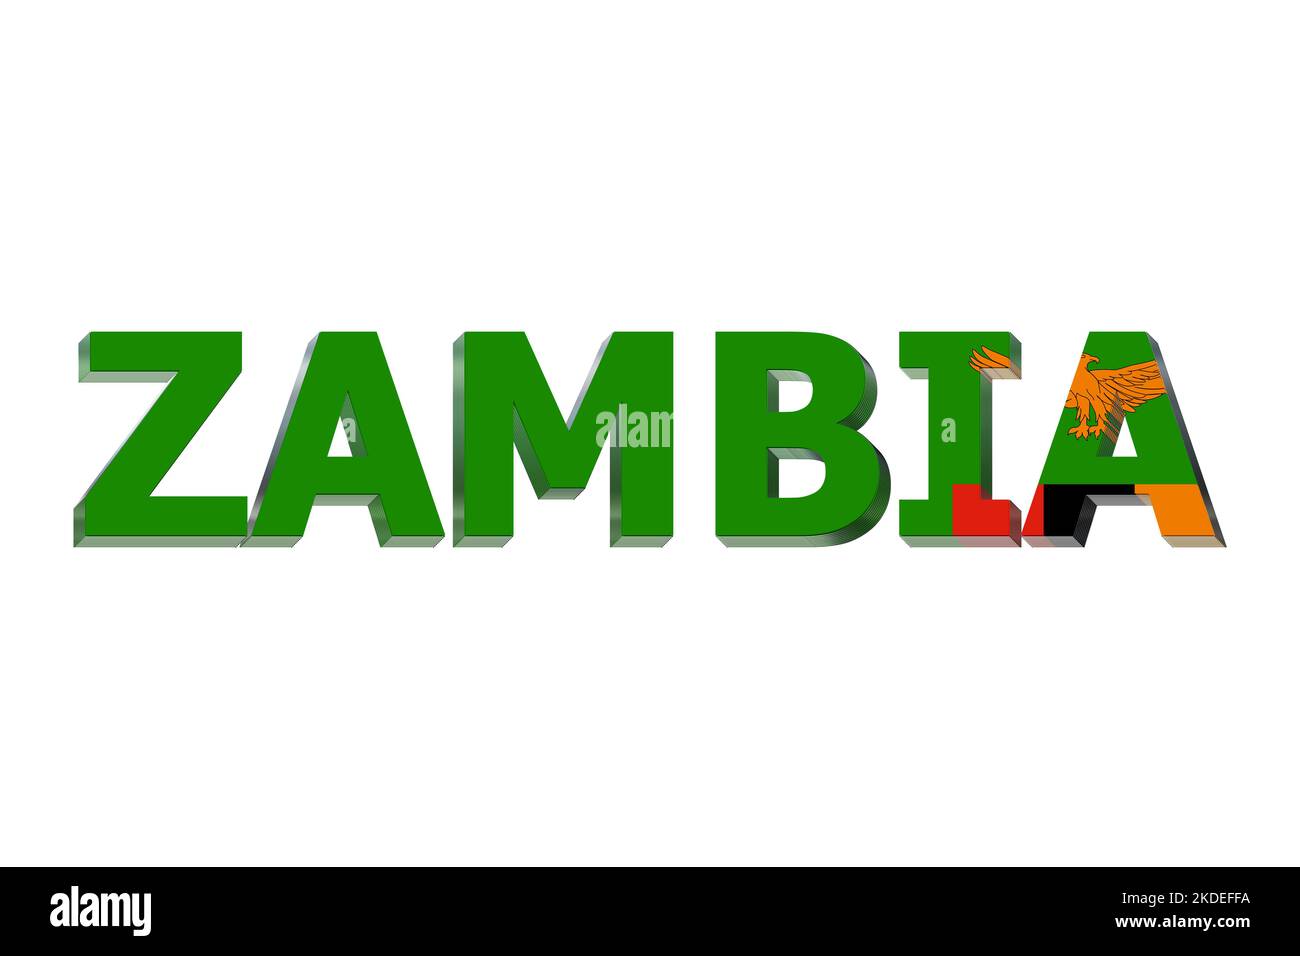 3D Flag of Zambia on a text background. Stock Photo